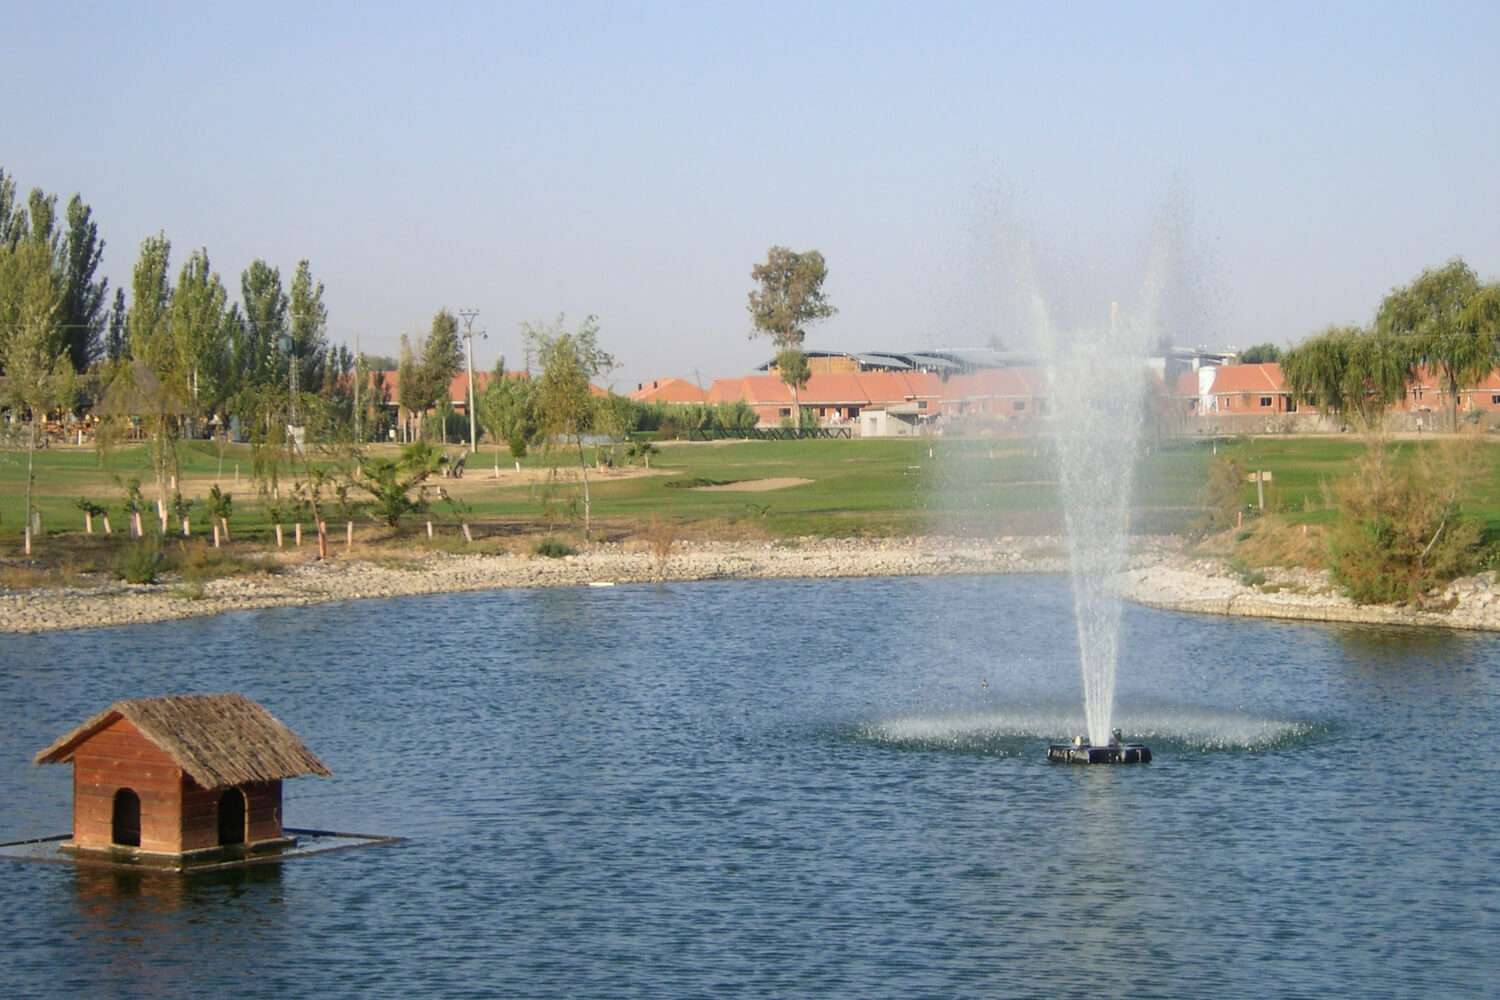 One of Otterbine's Rocket Aerating Geyser Fountains at a resort